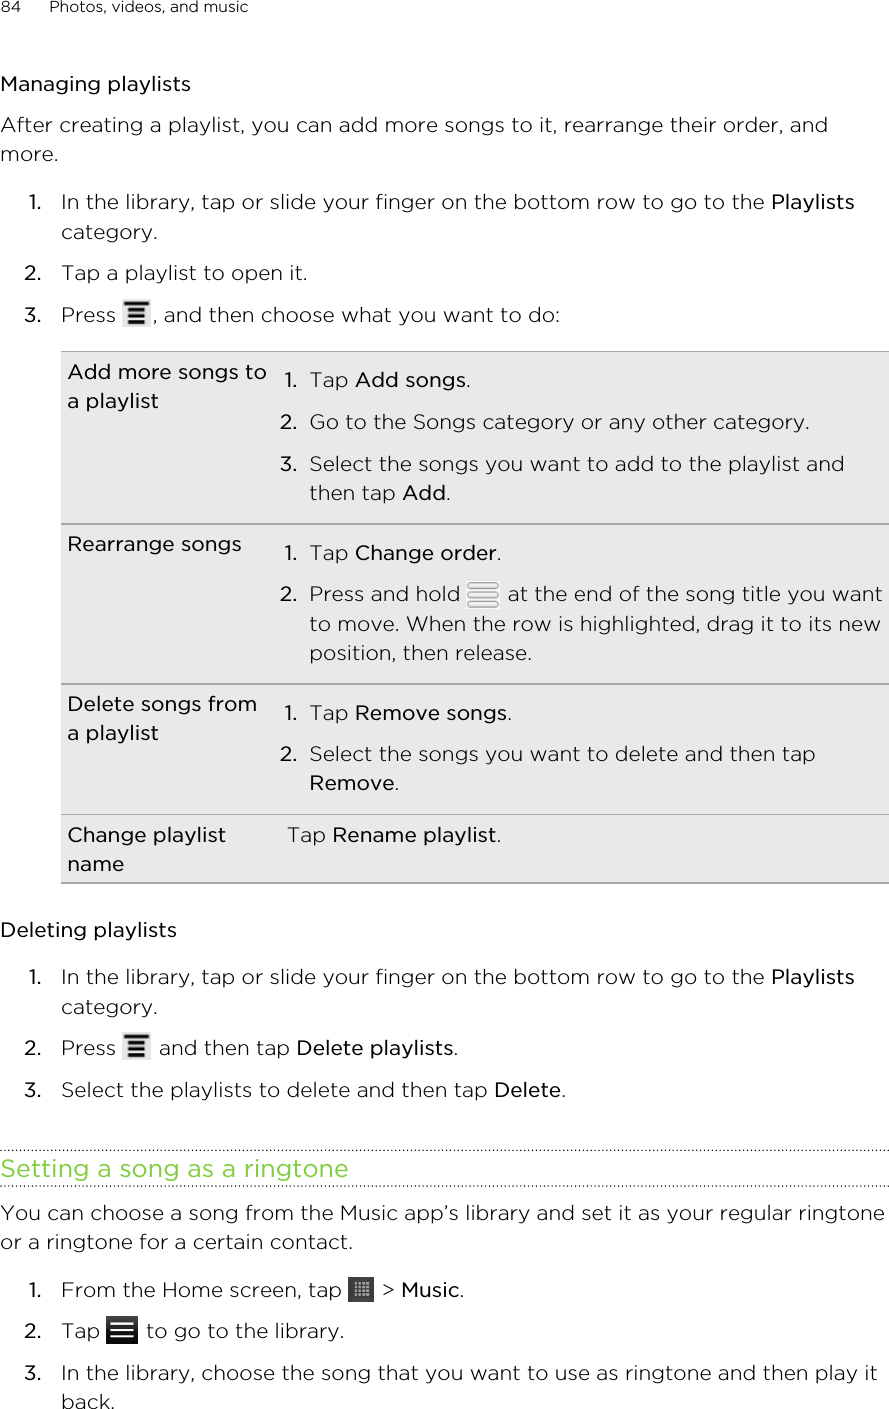 Managing playlistsAfter creating a playlist, you can add more songs to it, rearrange their order, andmore.1. In the library, tap or slide your finger on the bottom row to go to the Playlistscategory.2. Tap a playlist to open it.3. Press  , and then choose what you want to do:Add more songs toa playlist 1. Tap Add songs.2. Go to the Songs category or any other category.3. Select the songs you want to add to the playlist andthen tap Add.Rearrange songs 1. Tap Change order.2. Press and hold   at the end of the song title you wantto move. When the row is highlighted, drag it to its newposition, then release.Delete songs froma playlist 1. Tap Remove songs.2. Select the songs you want to delete and then tapRemove.Change playlistnameTap Rename playlist.Deleting playlists1. In the library, tap or slide your finger on the bottom row to go to the Playlistscategory.2. Press   and then tap Delete playlists.3. Select the playlists to delete and then tap Delete.Setting a song as a ringtoneYou can choose a song from the Music app’s library and set it as your regular ringtoneor a ringtone for a certain contact.1. From the Home screen, tap   &gt; Music.2. Tap   to go to the library.3. In the library, choose the song that you want to use as ringtone and then play itback.84 Photos, videos, and music